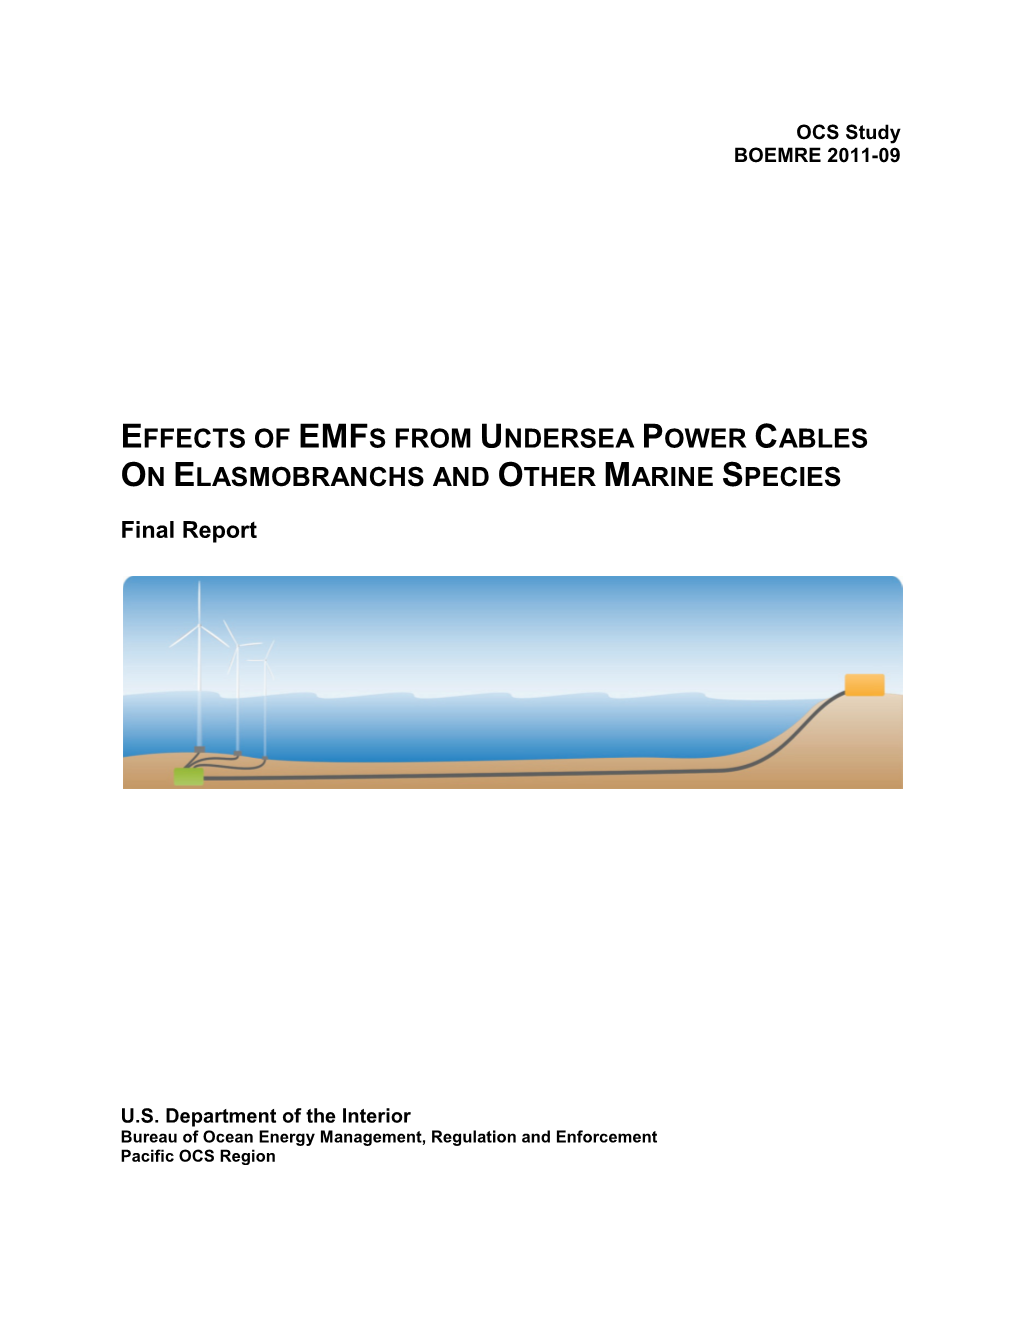 Effects of Emfs from Undersea Power Cables on Elasmobranchs and Other Marine Species